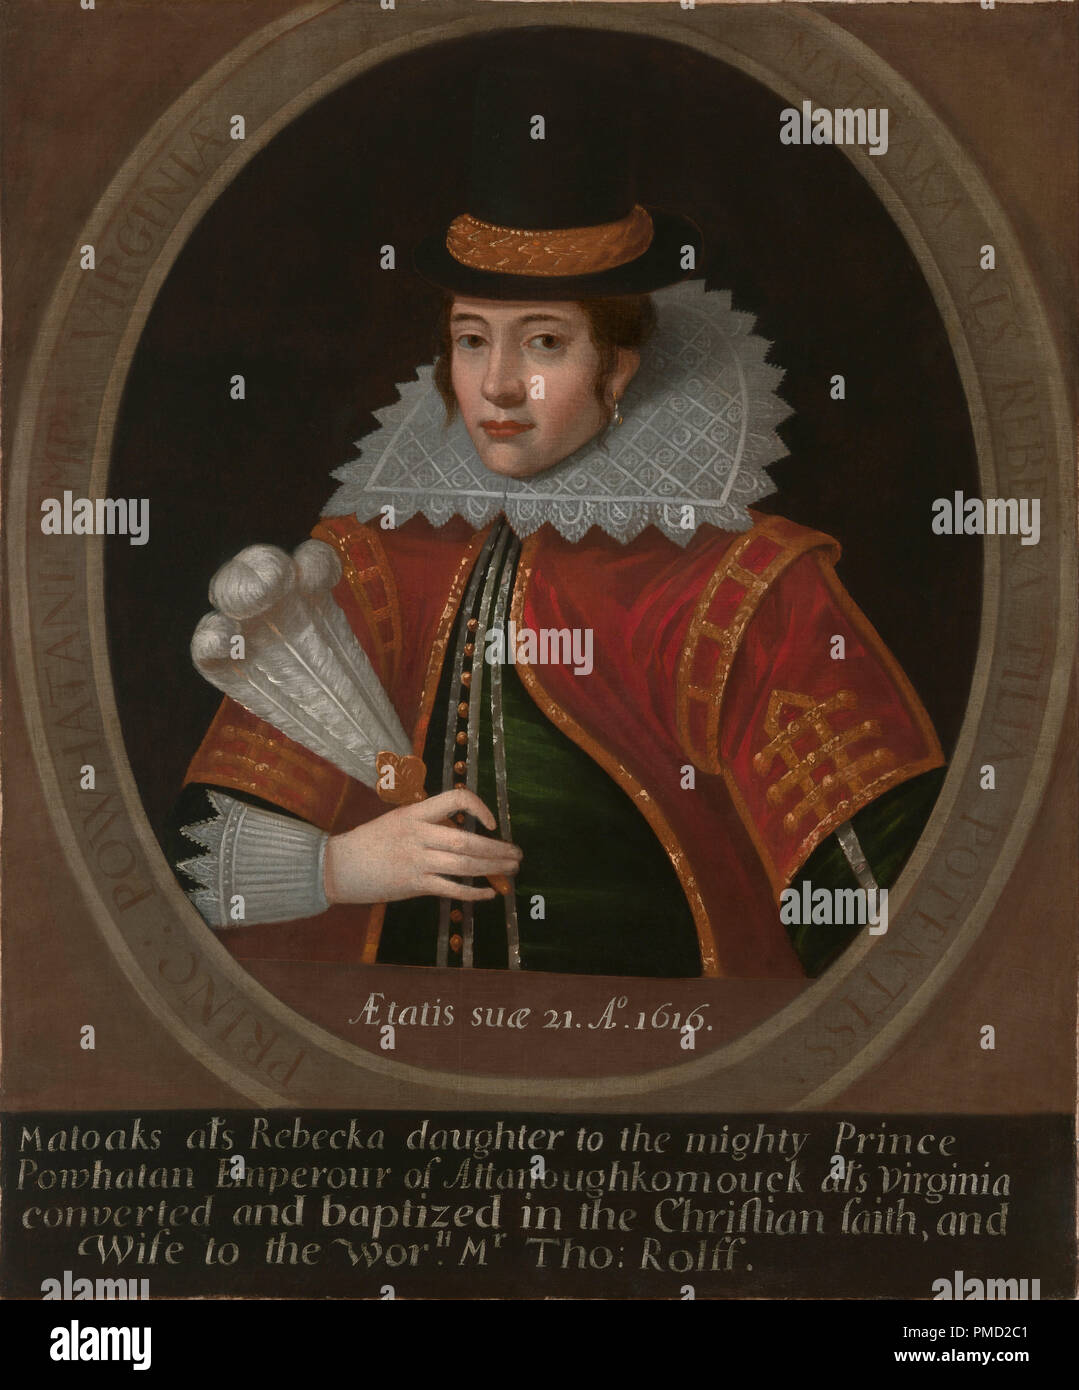 Pocahontas. Date/Period: After 1616. Painting. Oil on canvas. Height: 775 mm (30.51 in); Width: 648 mm (25.51 in). Author: Unidentified Artist. ANONYMOUS. Stock Photo